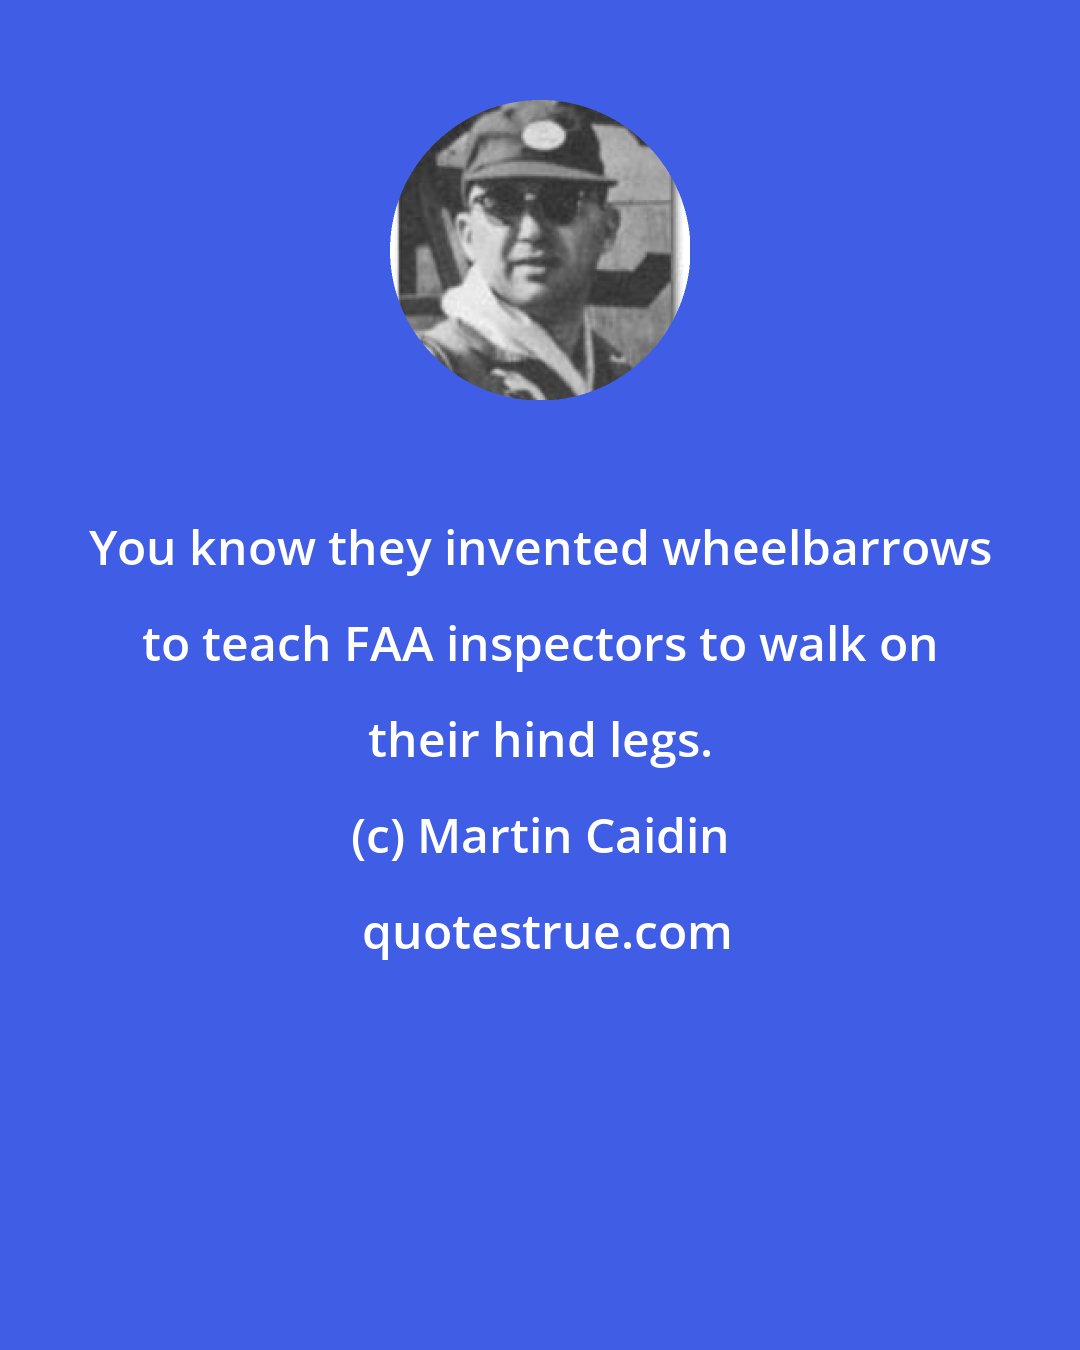 Martin Caidin: You know they invented wheelbarrows to teach FAA inspectors to walk on their hind legs.